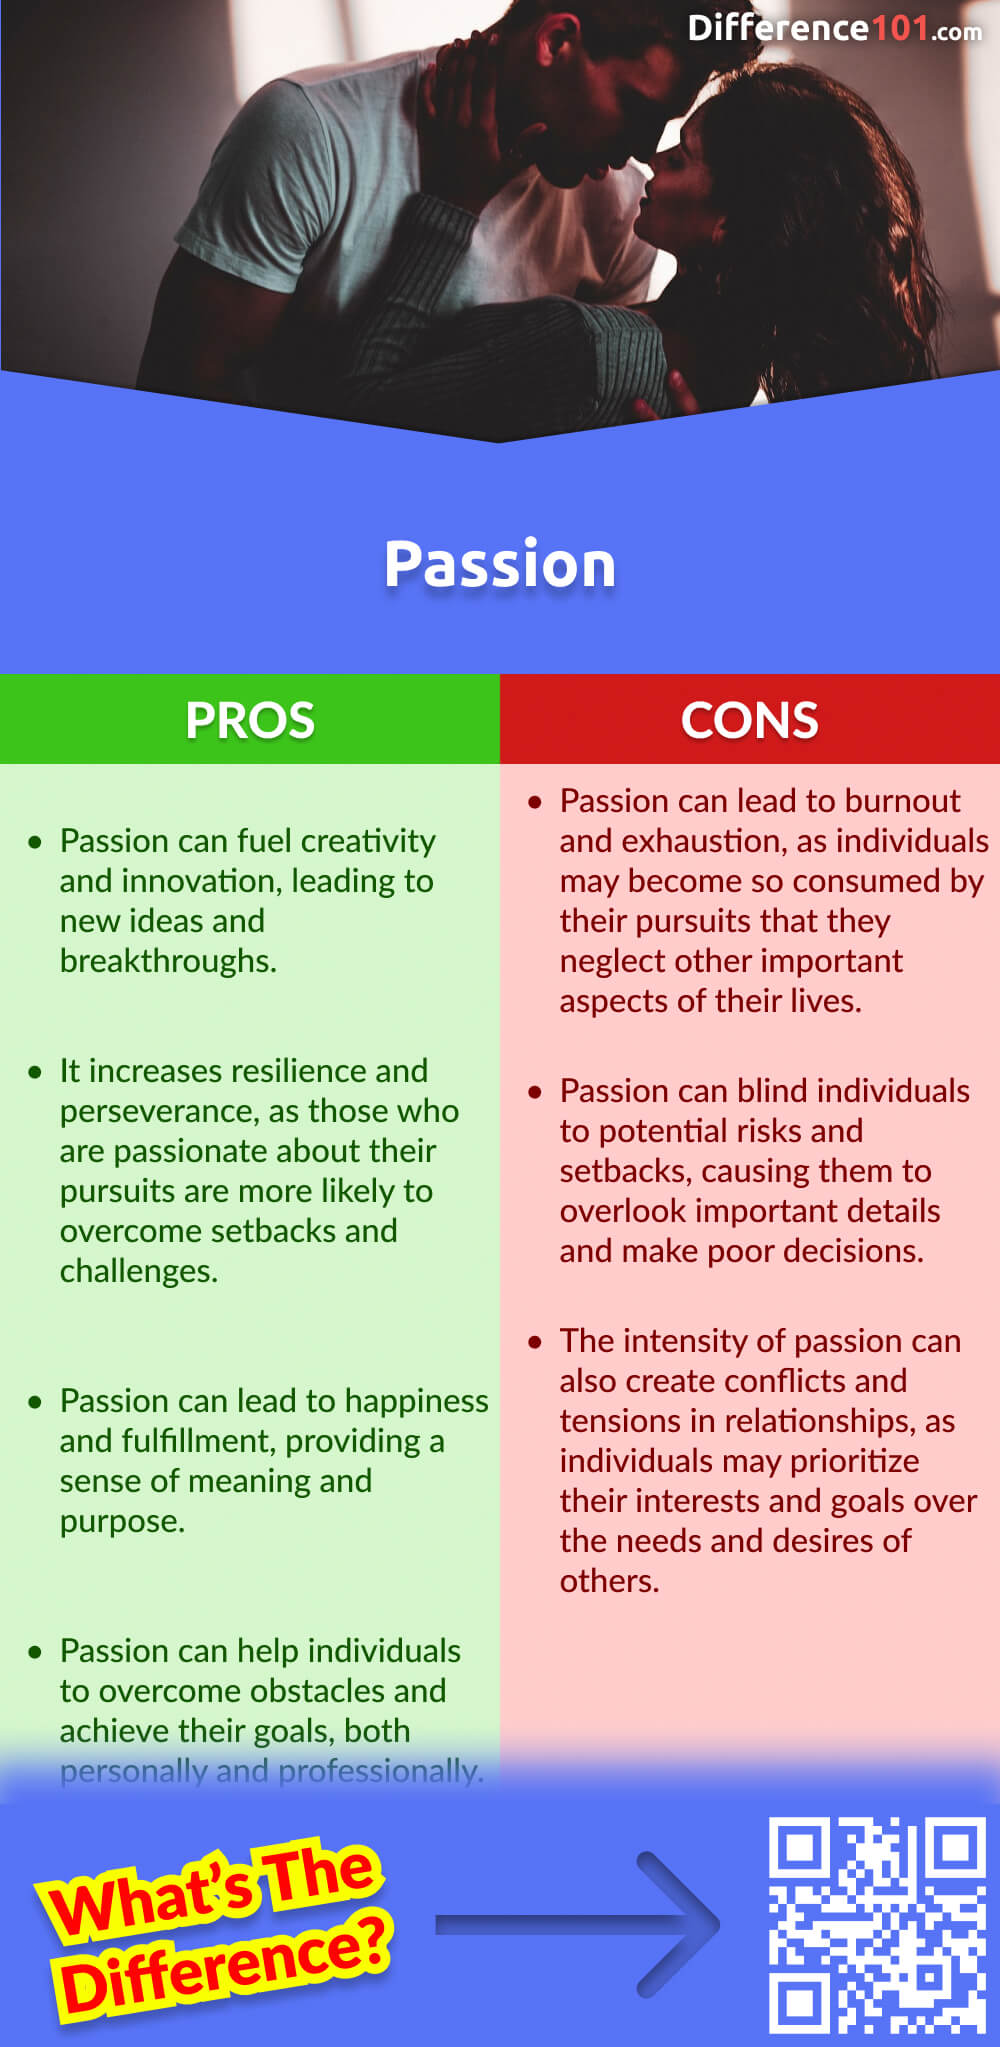 Passion Pros & Cons